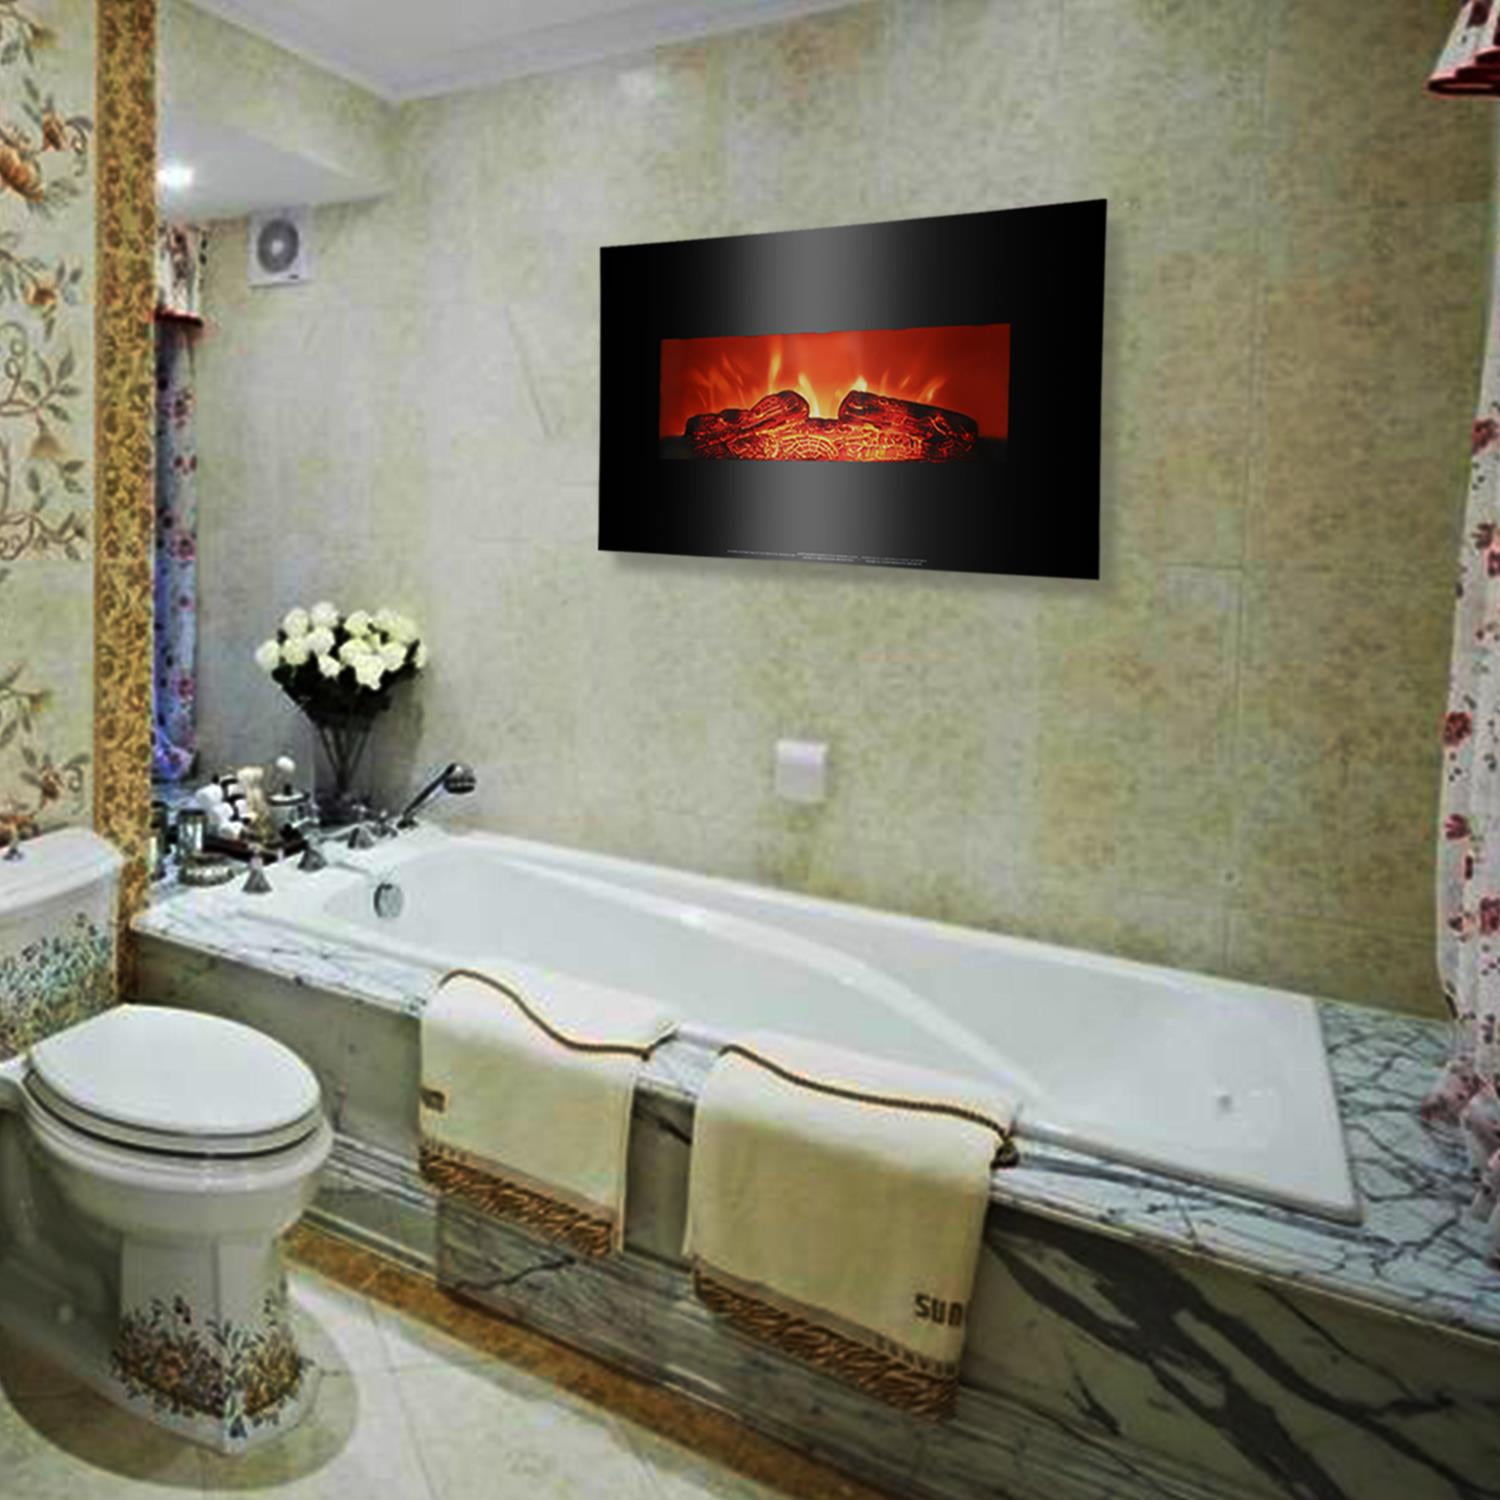 Zimtown 26 Wall Mount Electric, Electric Fireplace Over Bathtub